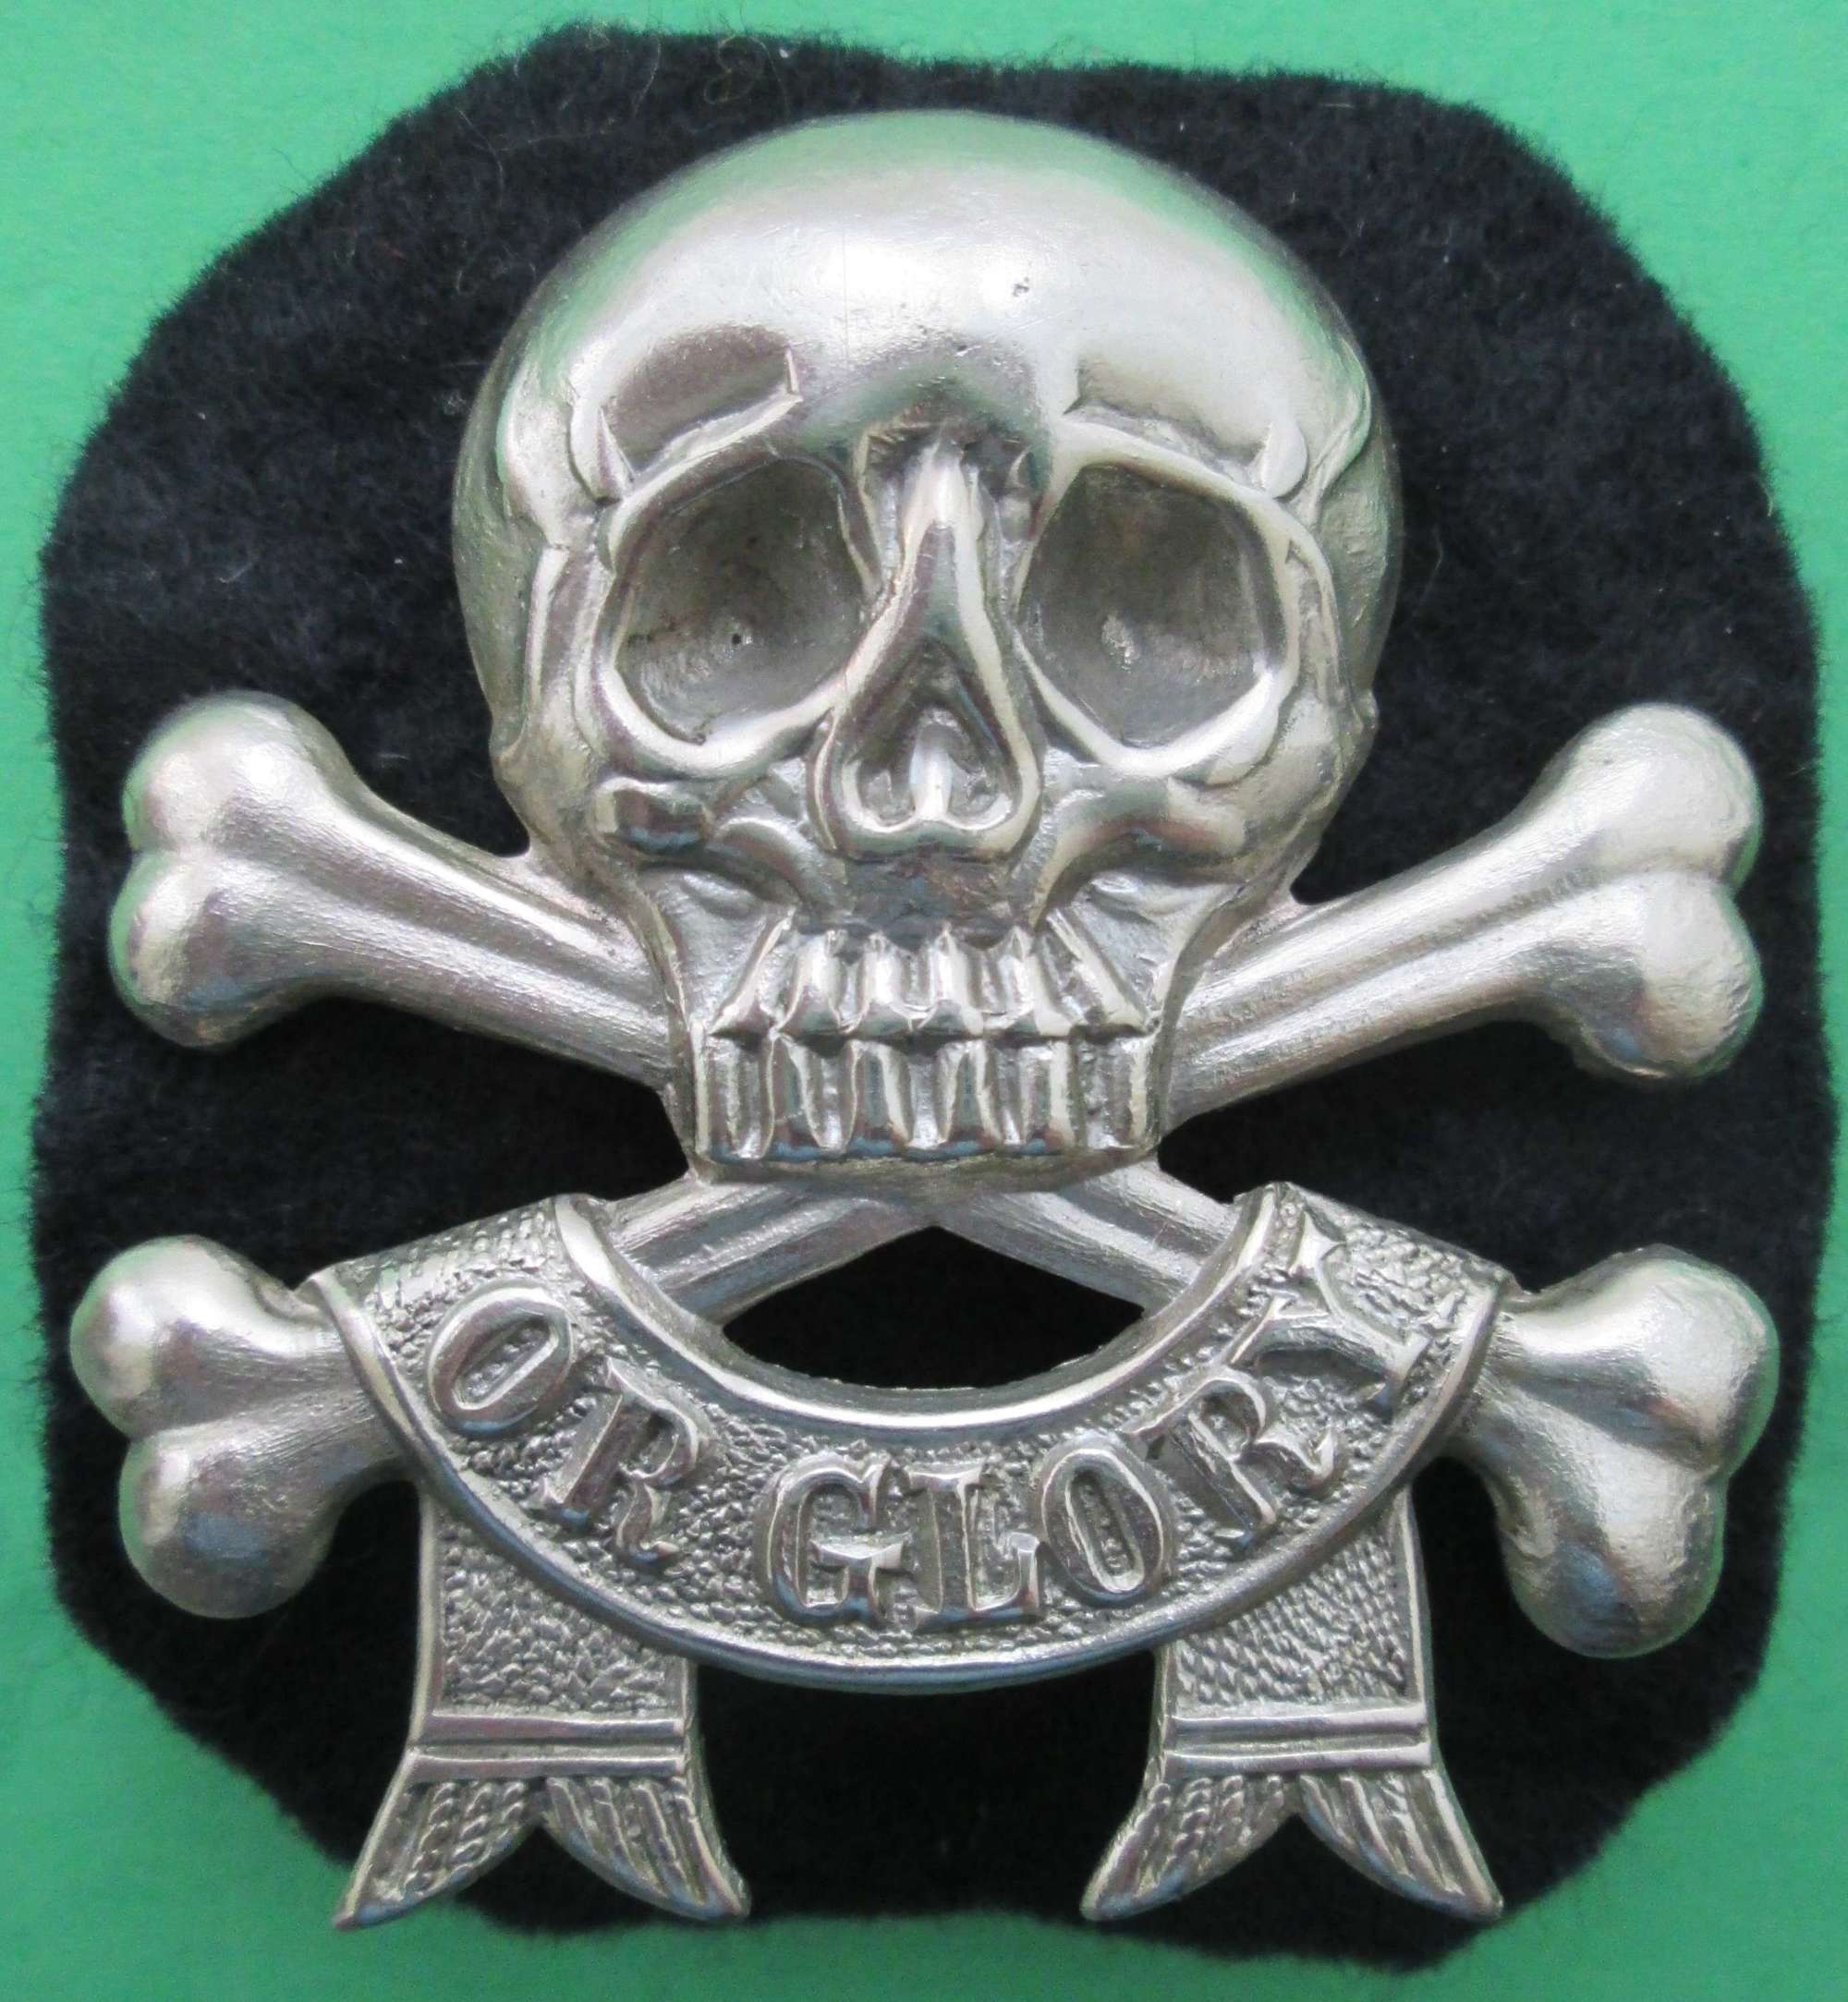 A 17/21ST LANCERS ARM  MOTTO BADGE POST 1922  EXAMPLE